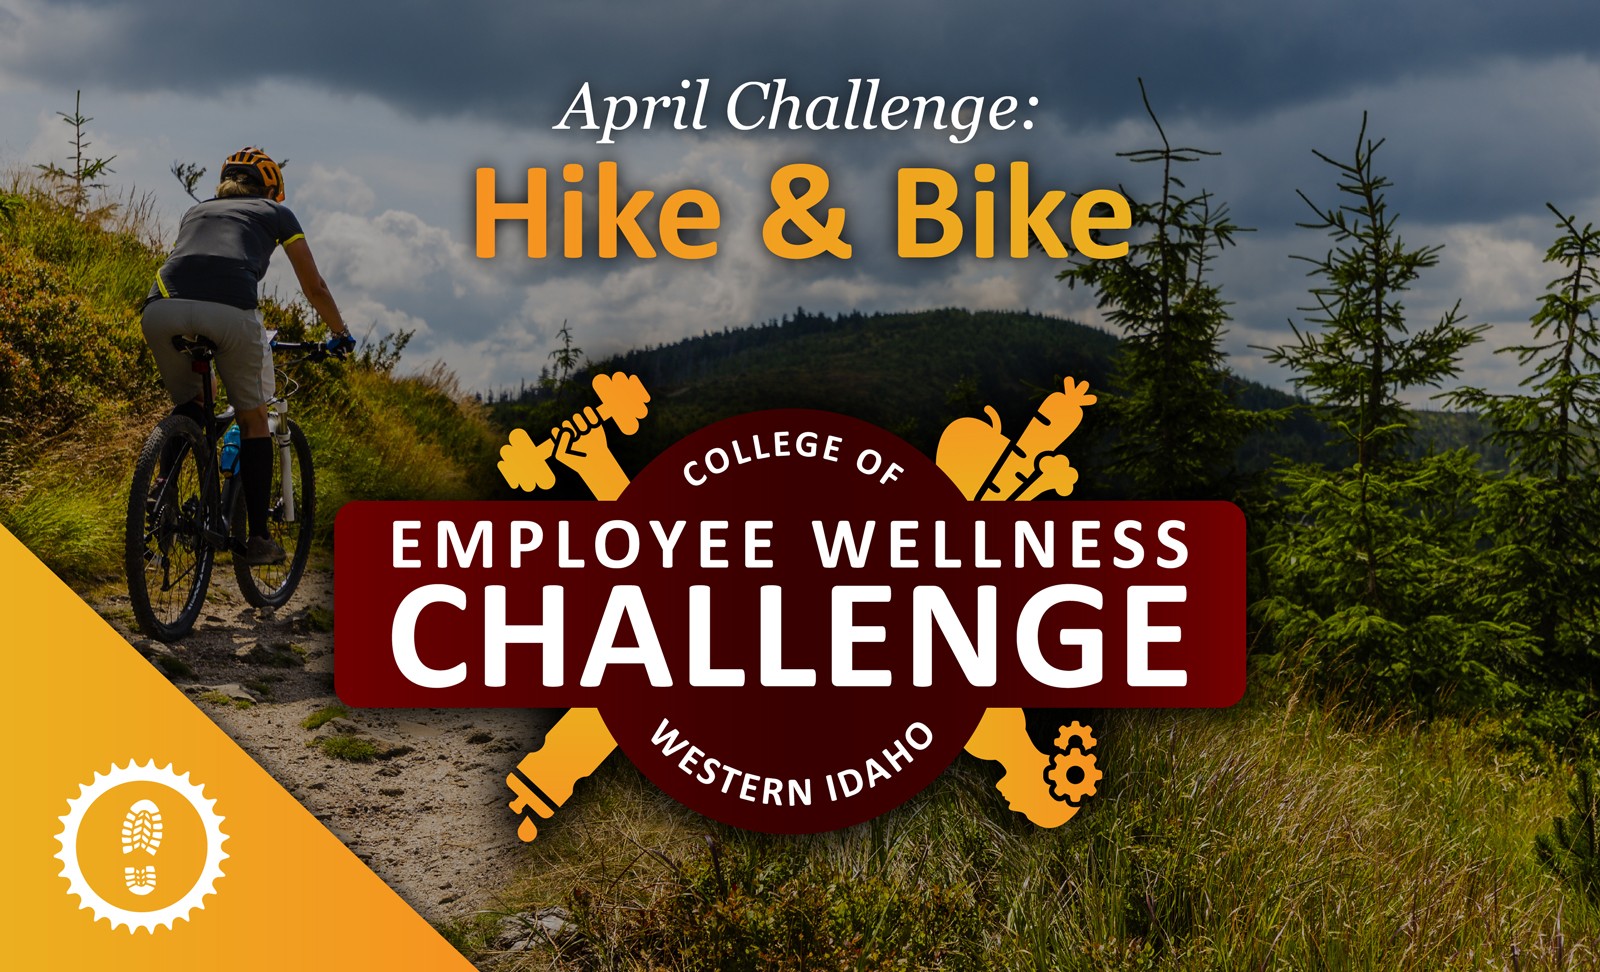 Sign up to participate in April’s Employee Wellness Challenge by Wednesday, March 31!